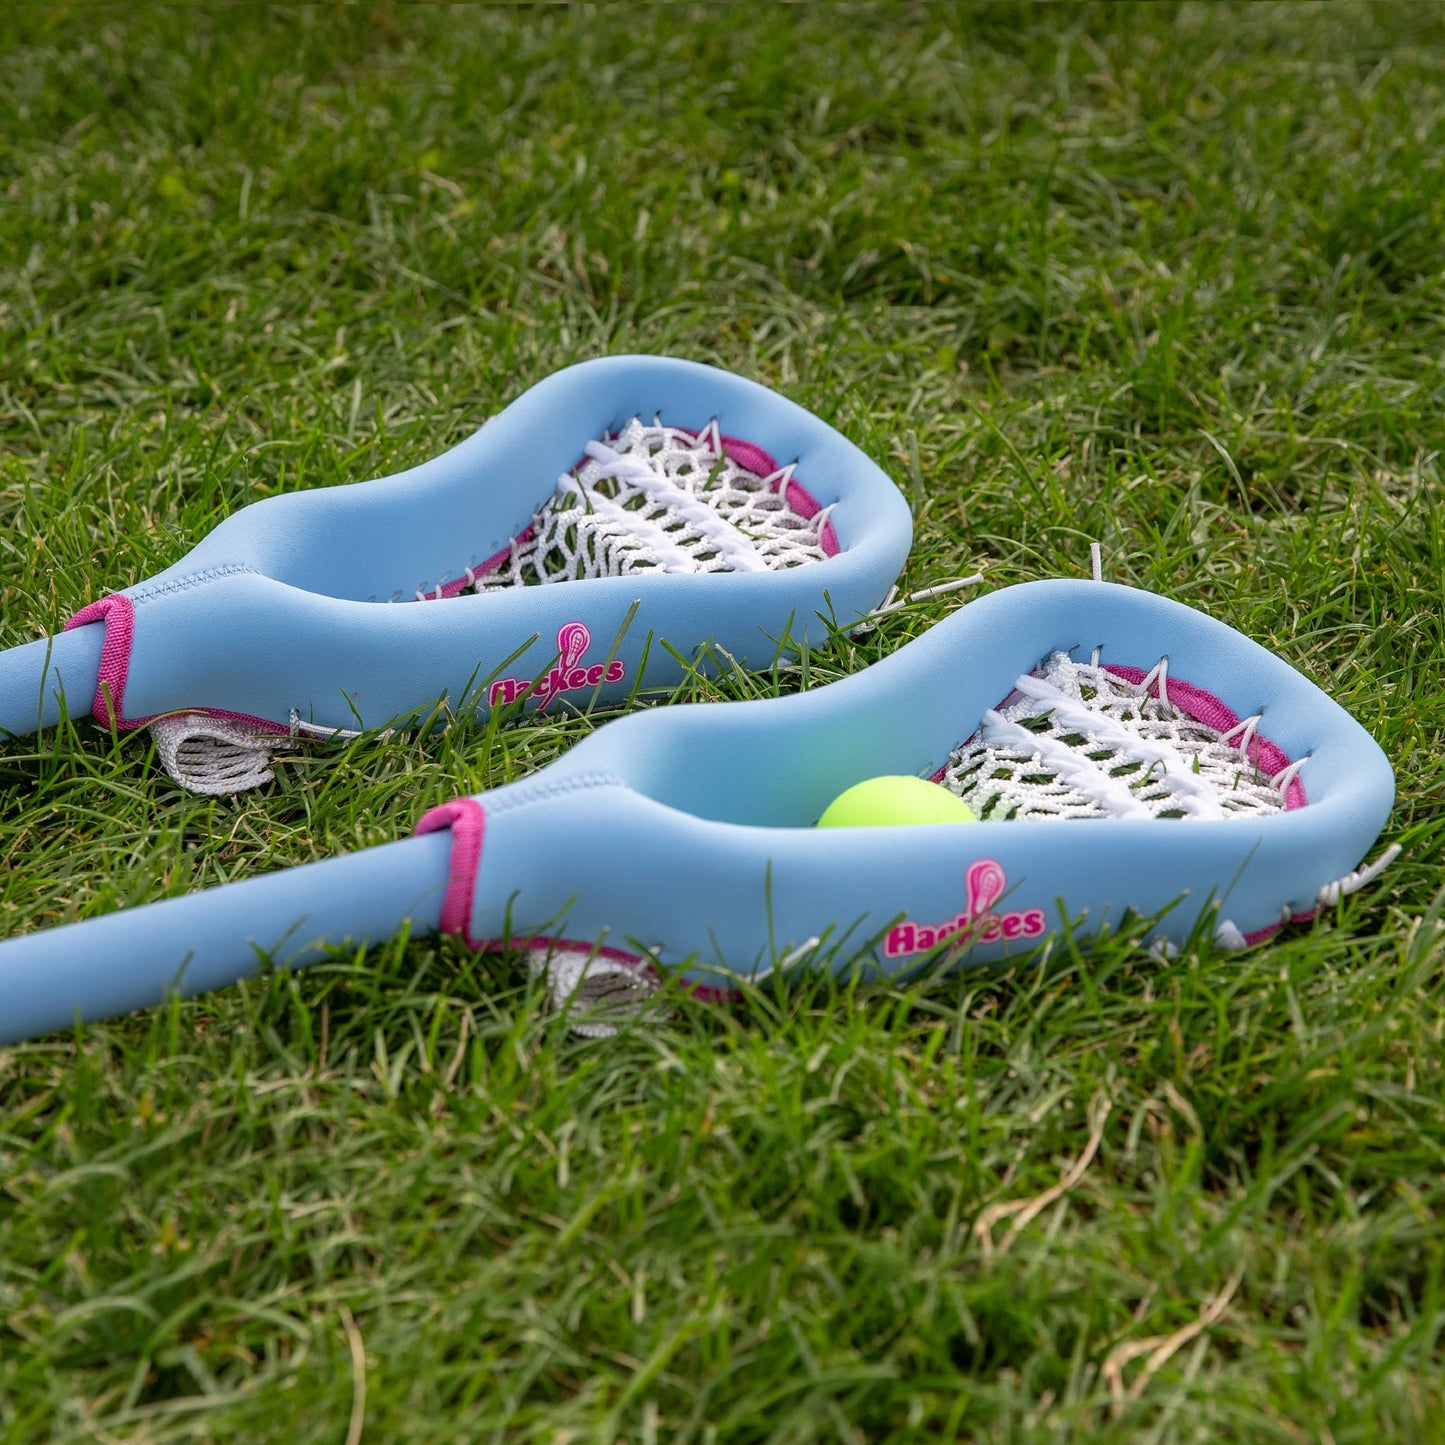 1 vs. 1 // Two Stick Pack Lacrosse Sticks Hackees Pink 